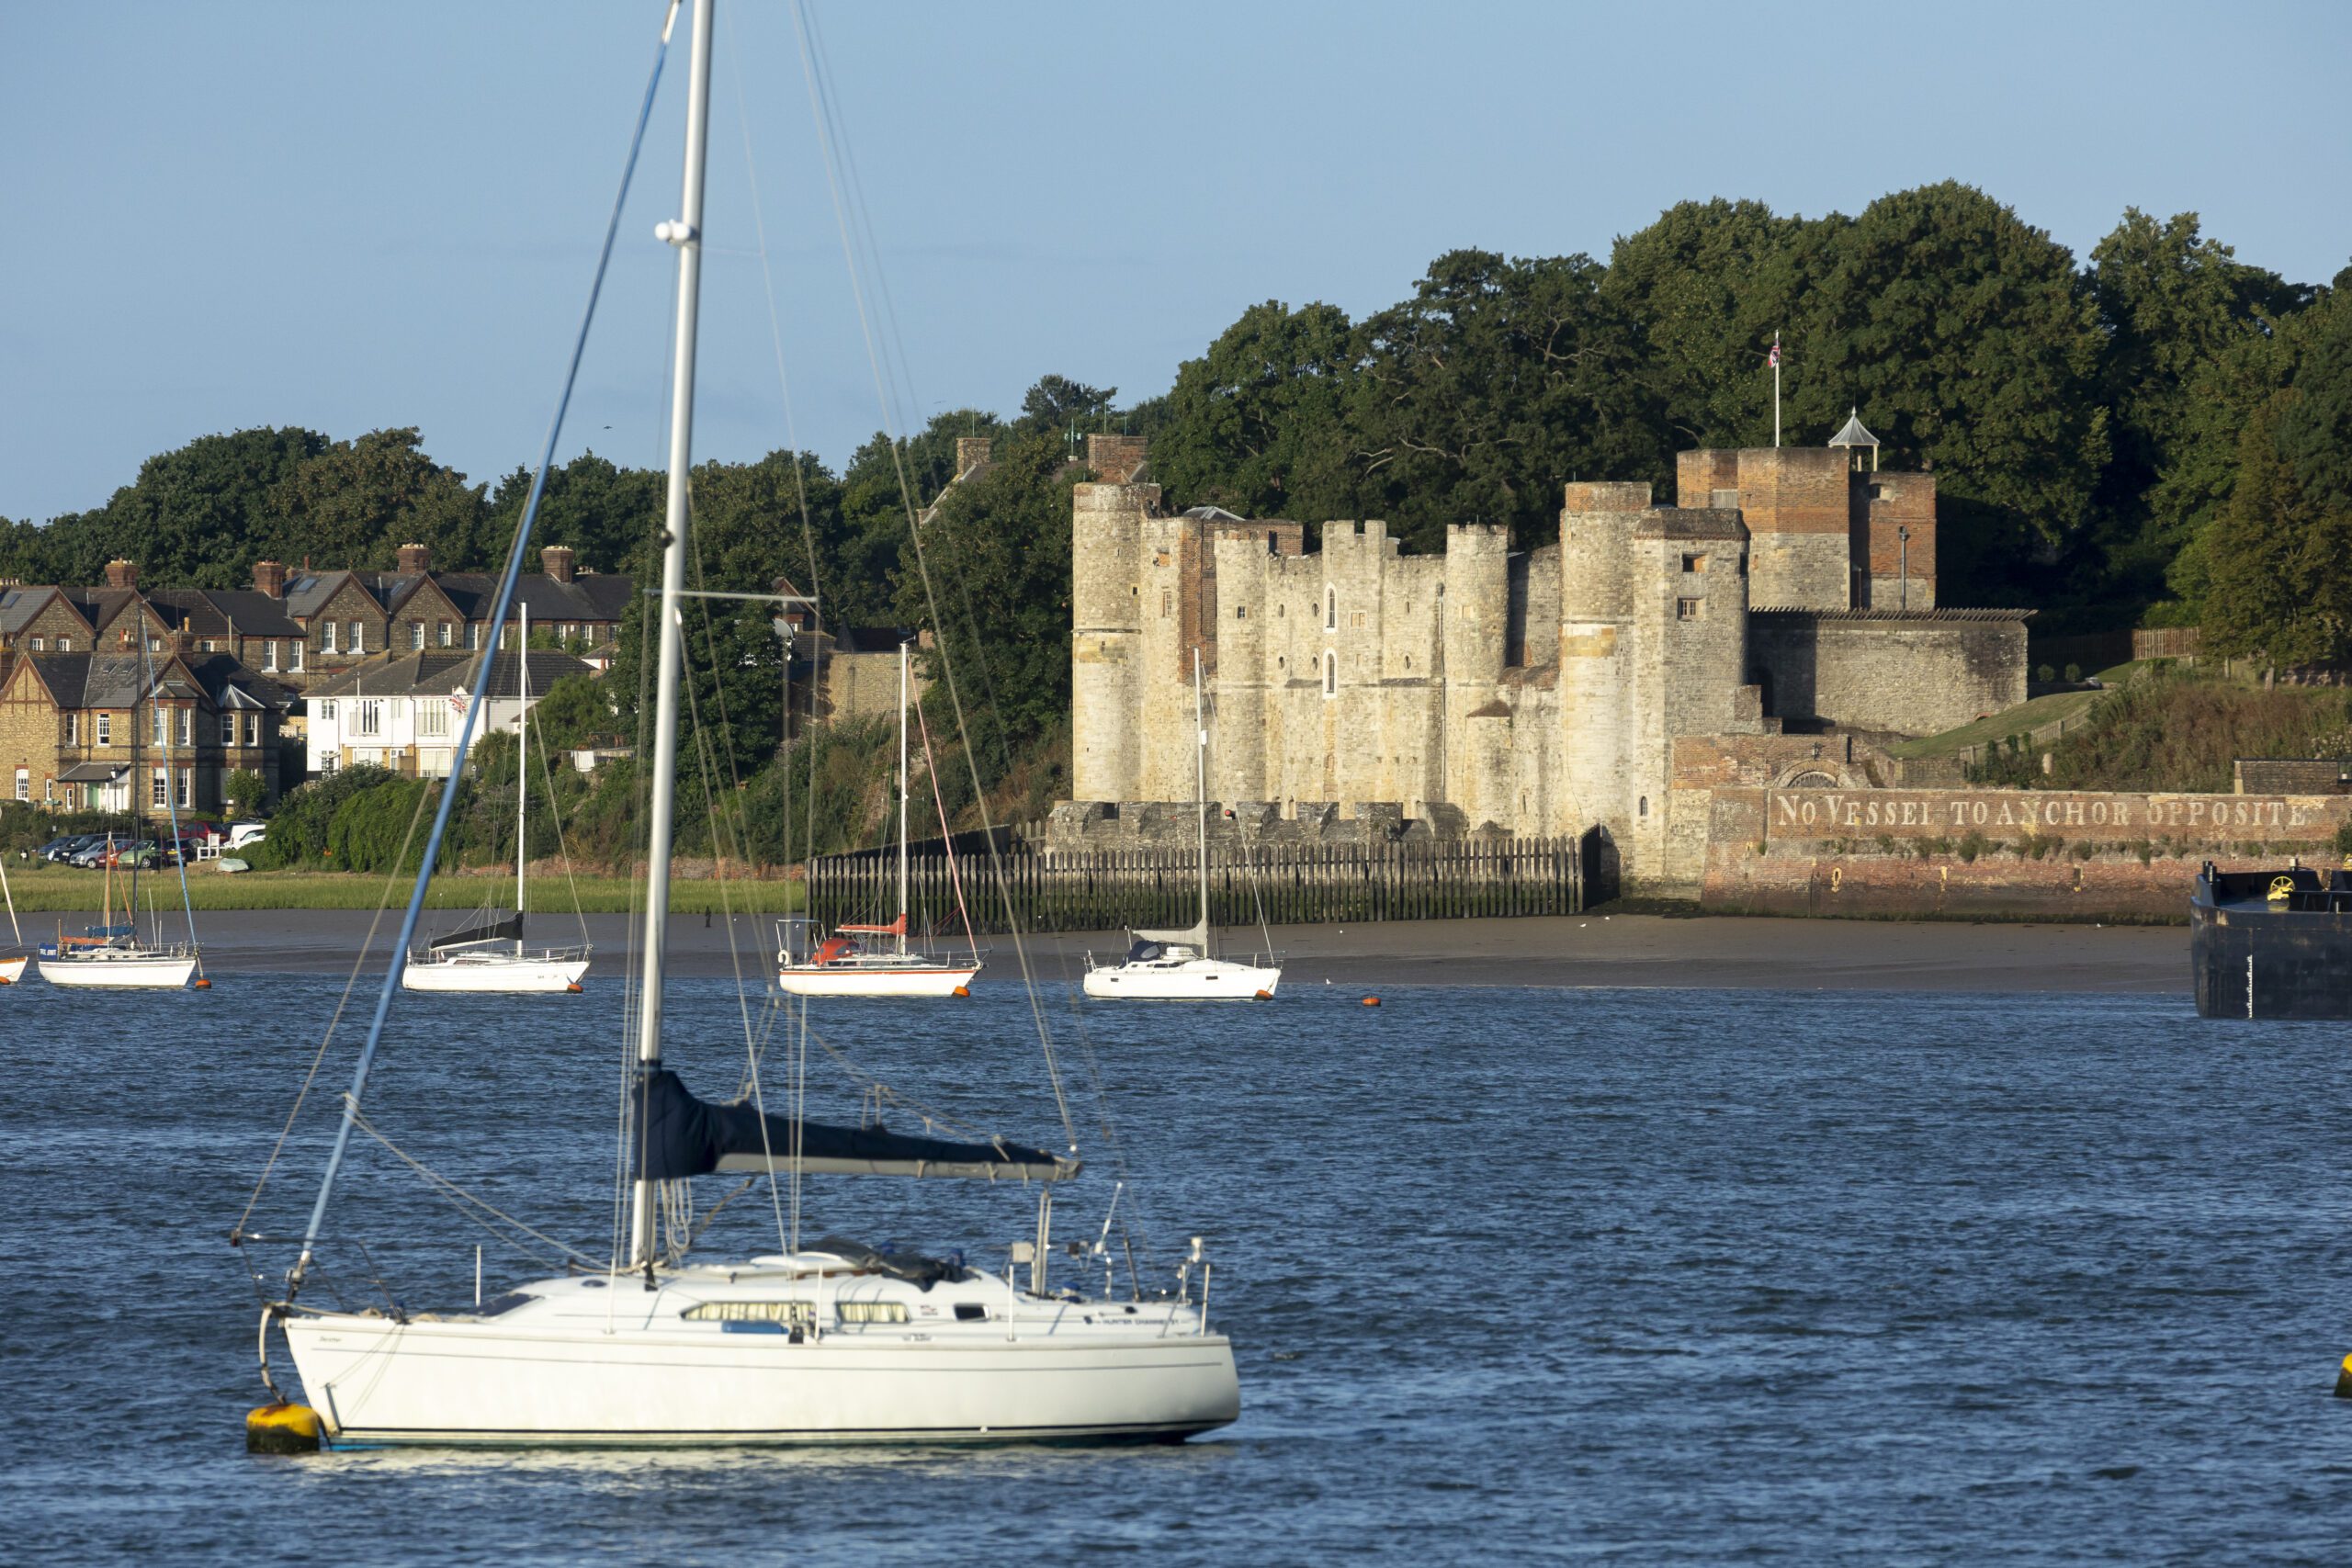 View of Upnor Castle with boats in the foreground.